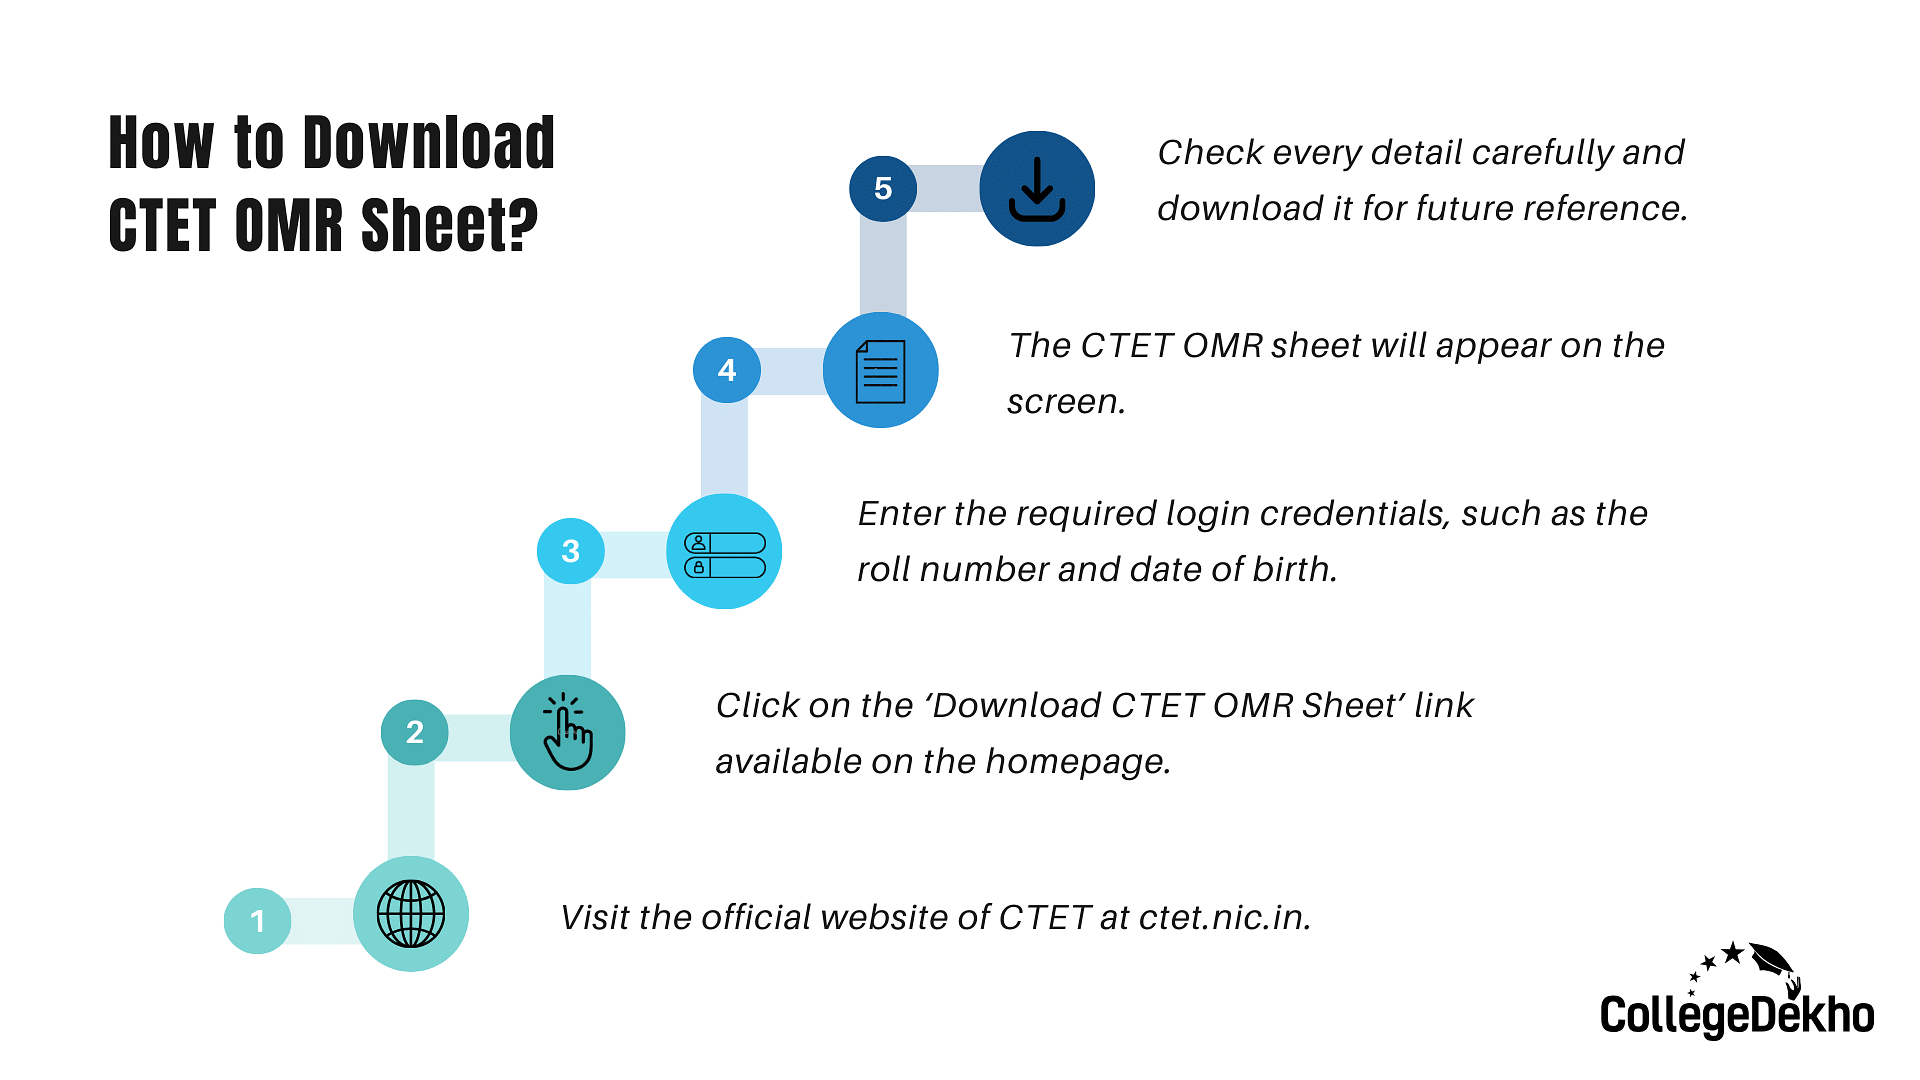 How to Download CTET OMR Sheet